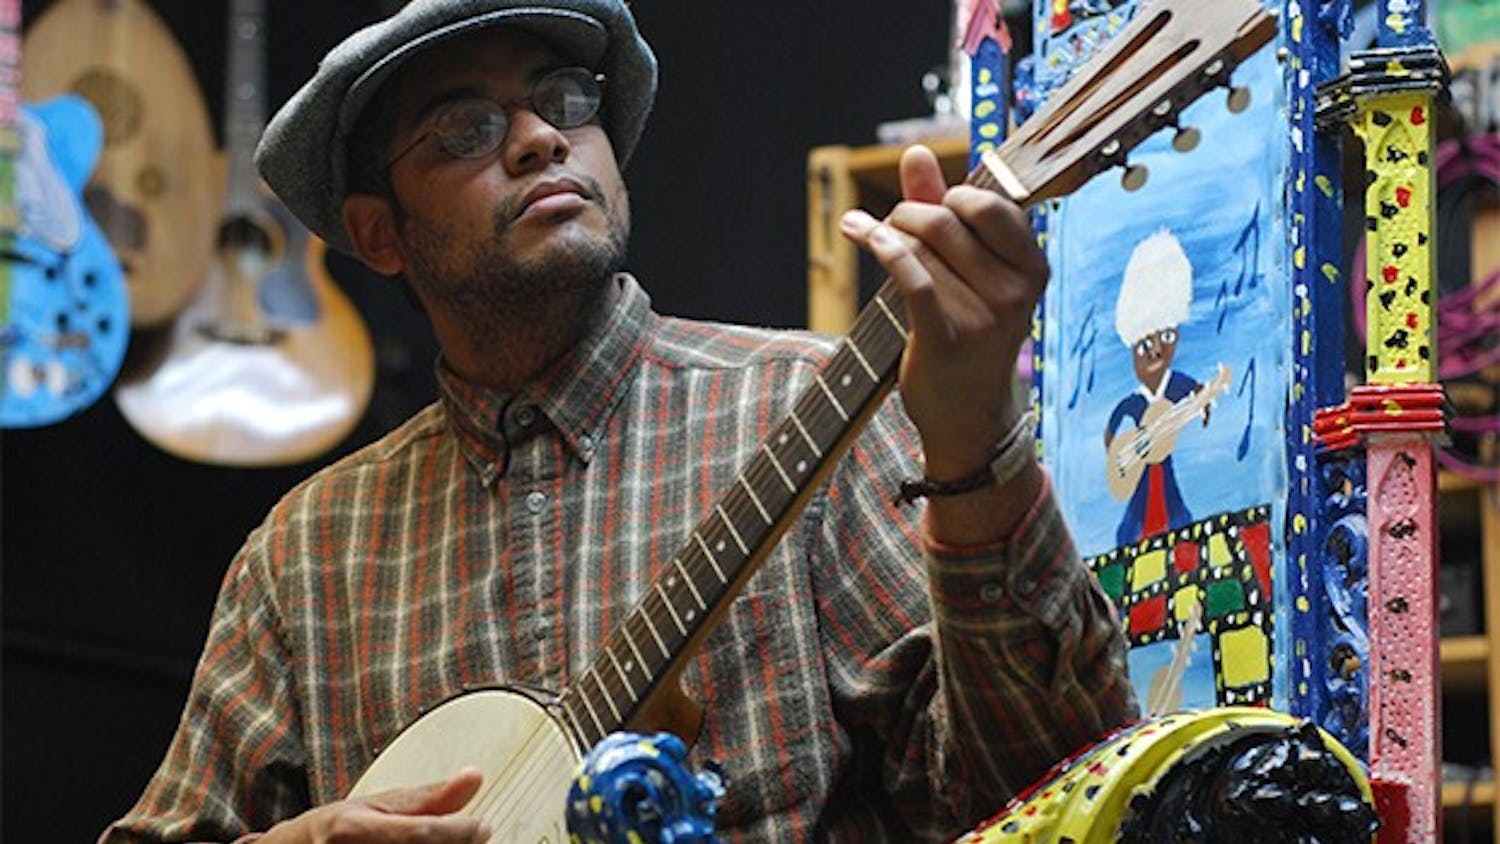 Profile are of Dom Flemons of the Carolina Chocolate Drops in his studio Music Maker Relief Foundation in Hillsborough. 